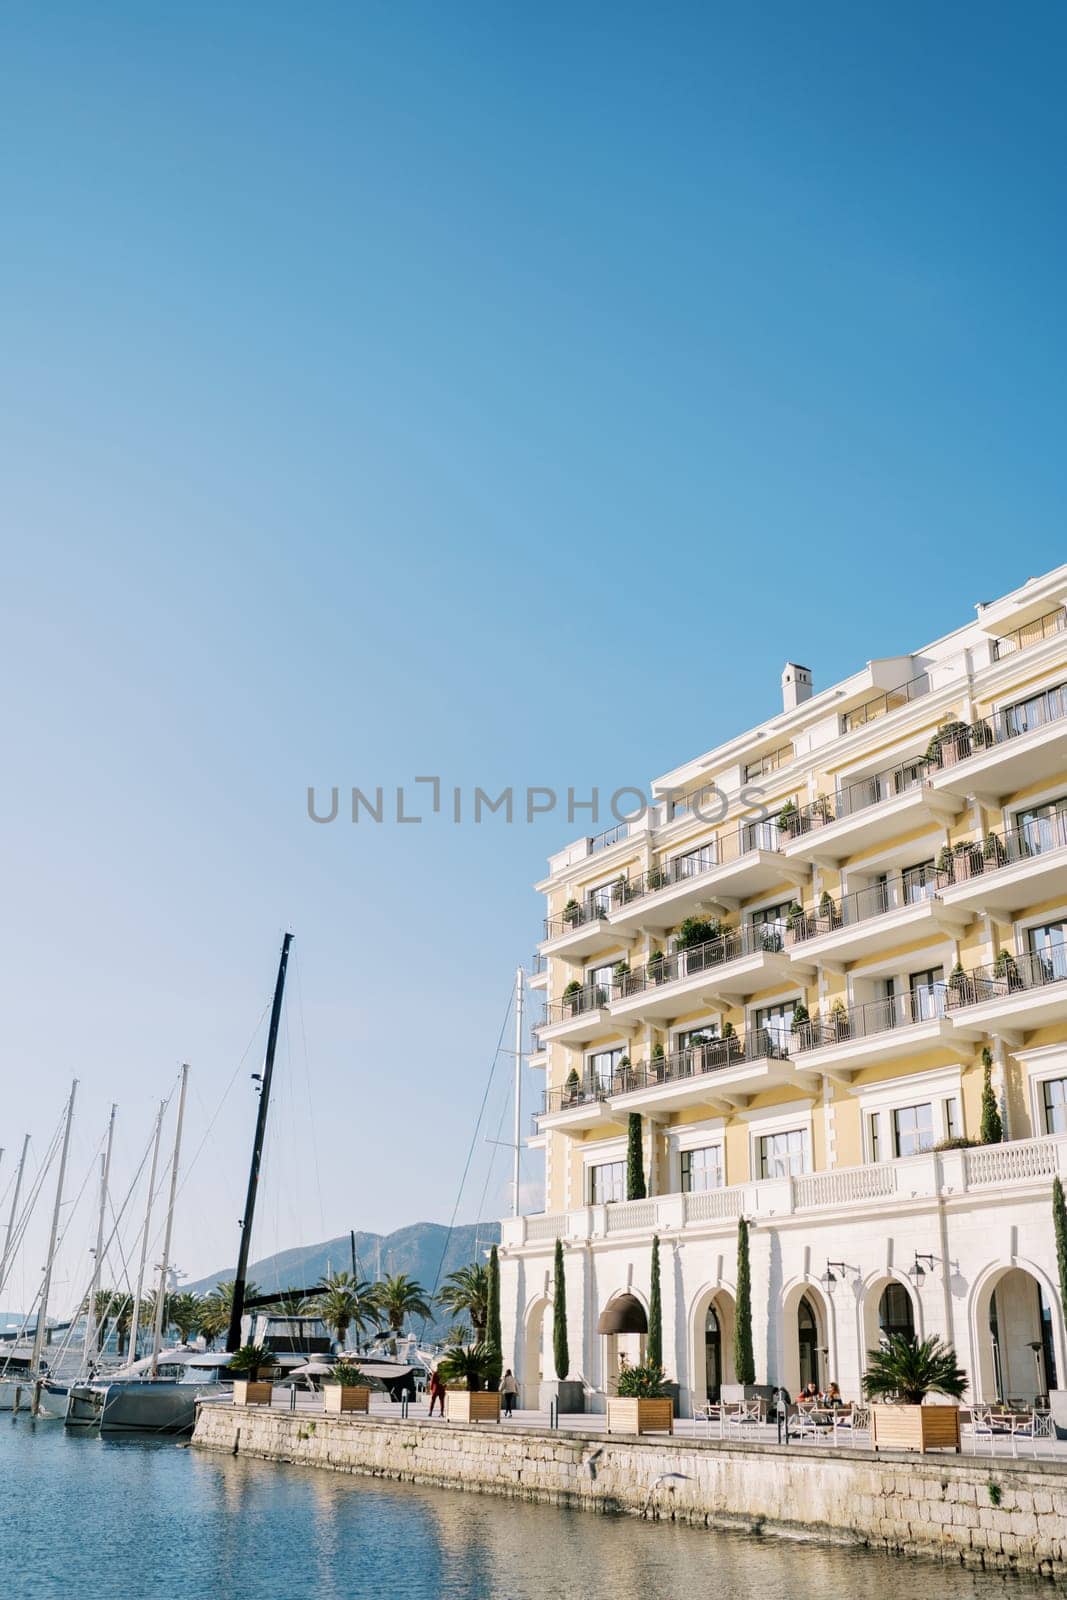 Luxurious Regent Hotel on the seafront next to moored sailing yachts. Porto, Montenegro. High quality photo